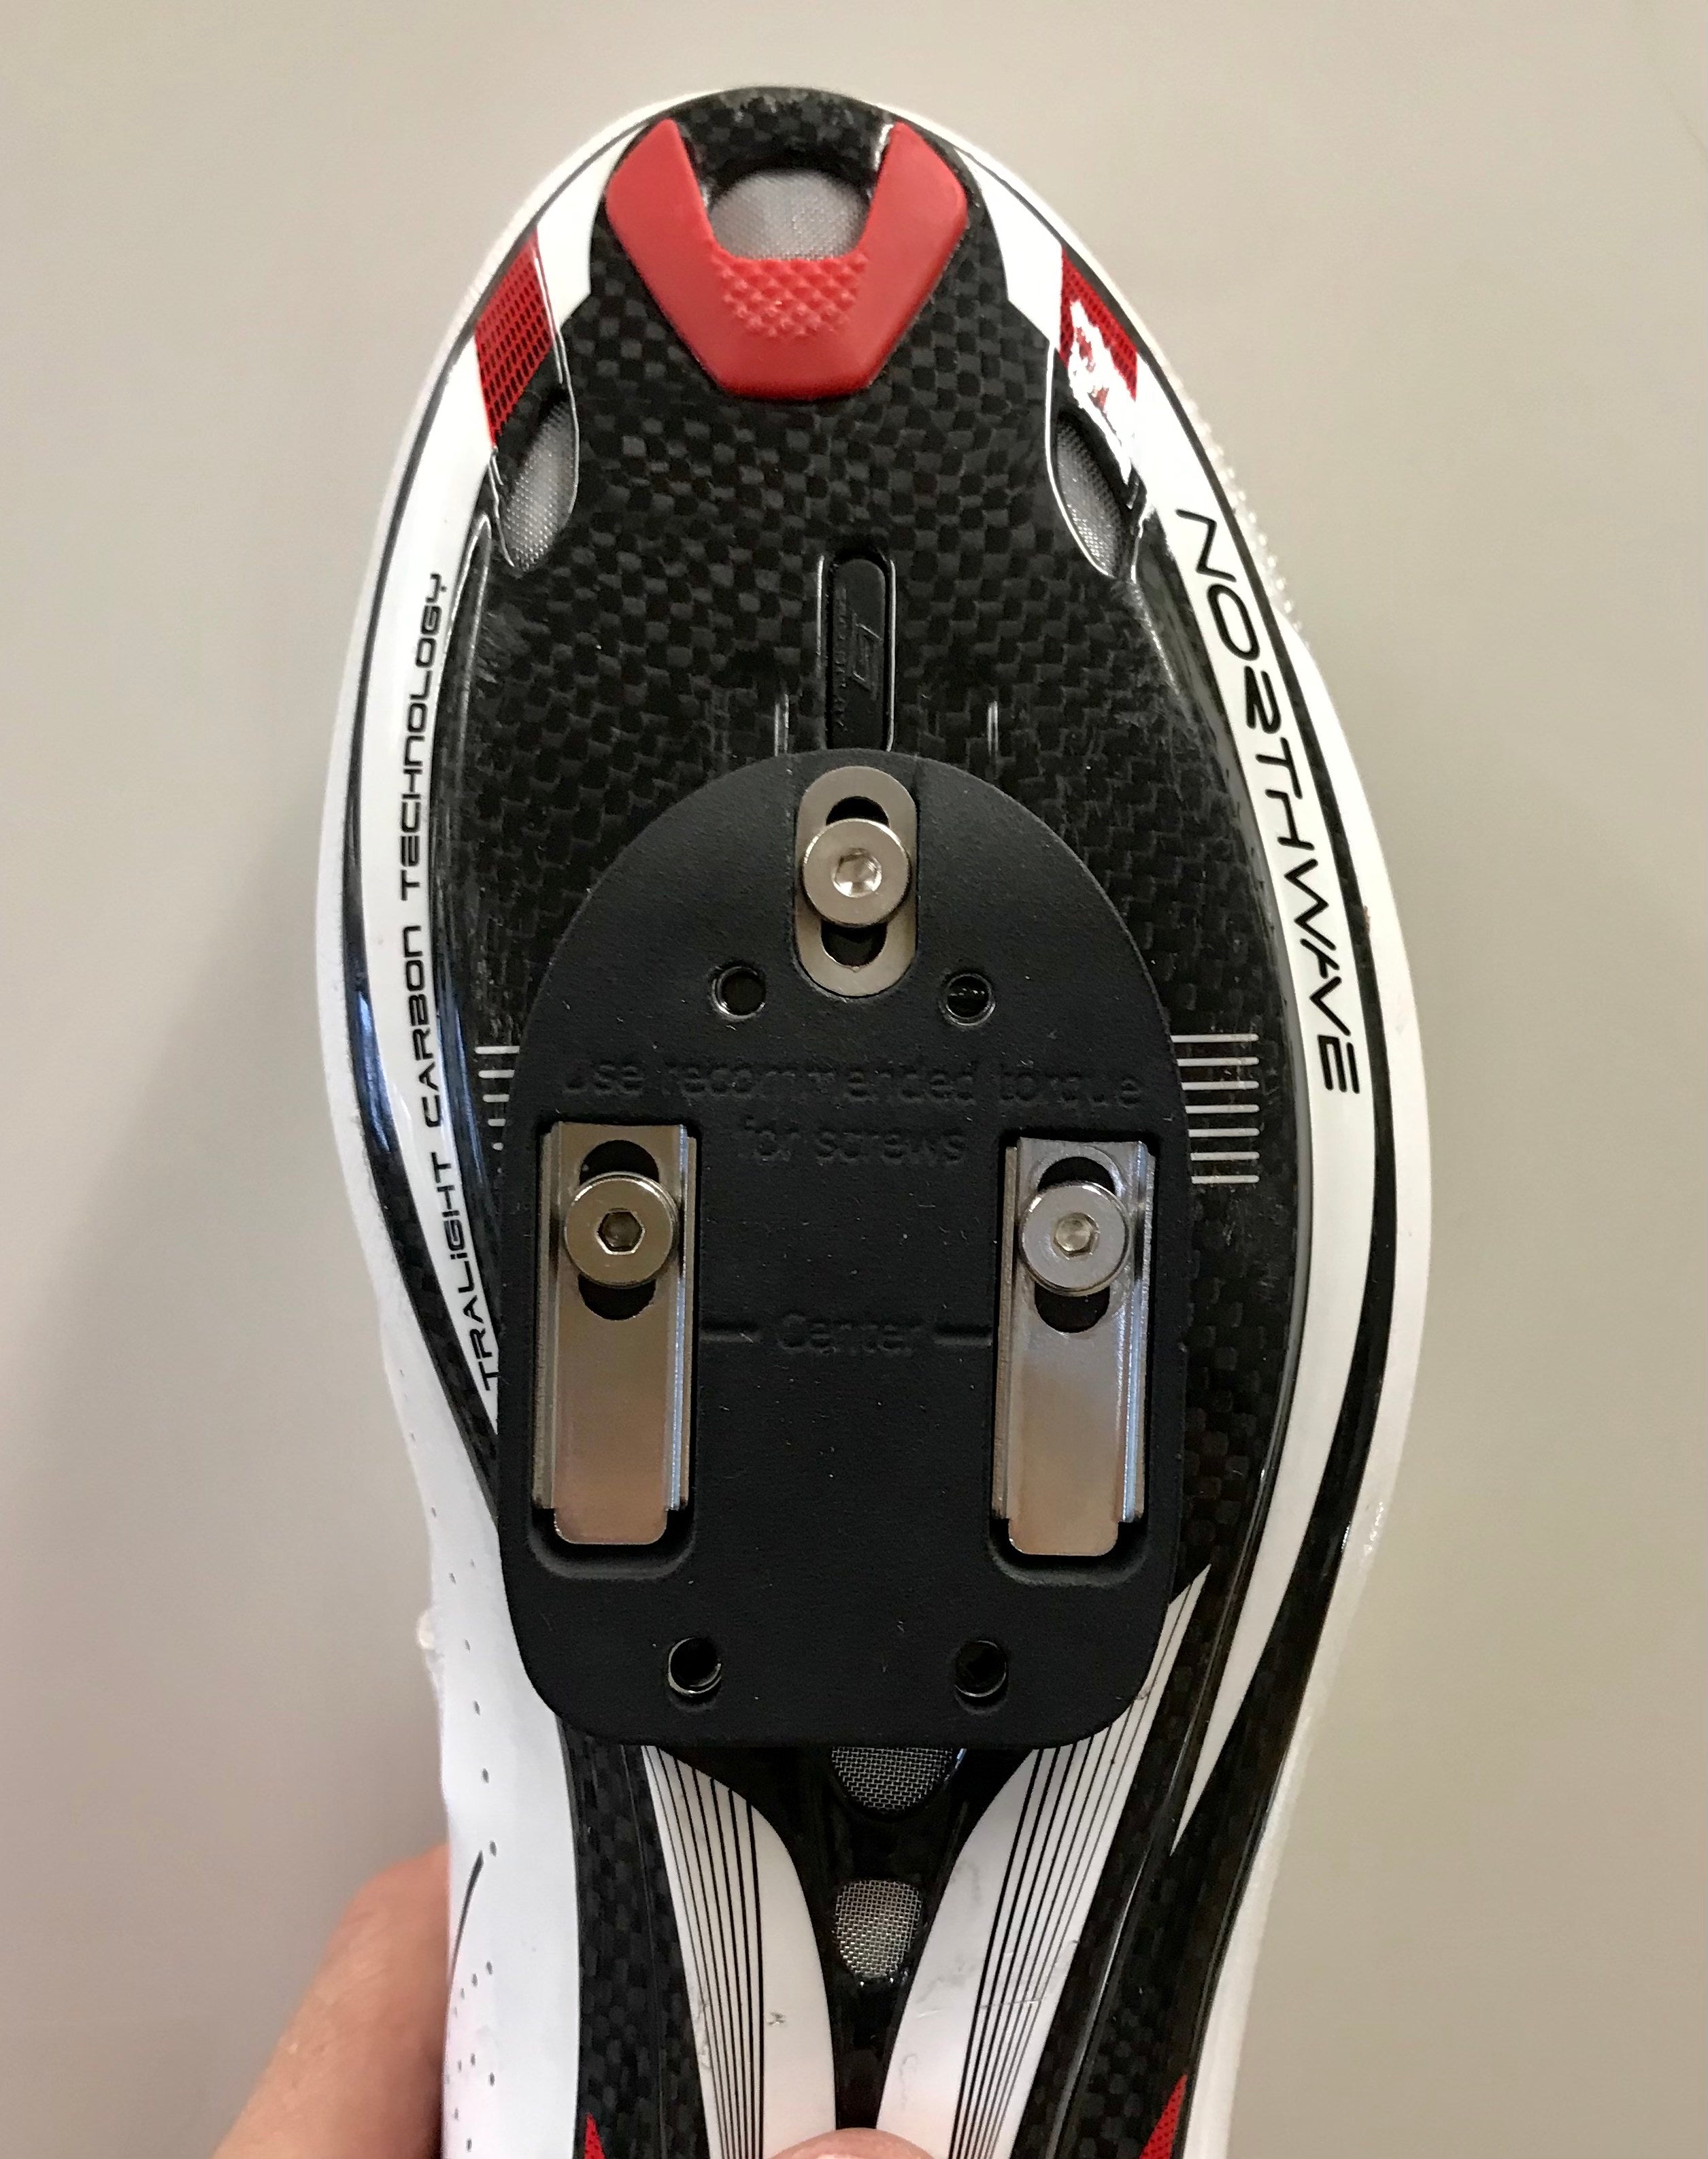 Cleat adapters for mortons neuroma, metatarsalgia, hot spots and other foot pain when cycling. Withoit cleat. Below cycling shoe.